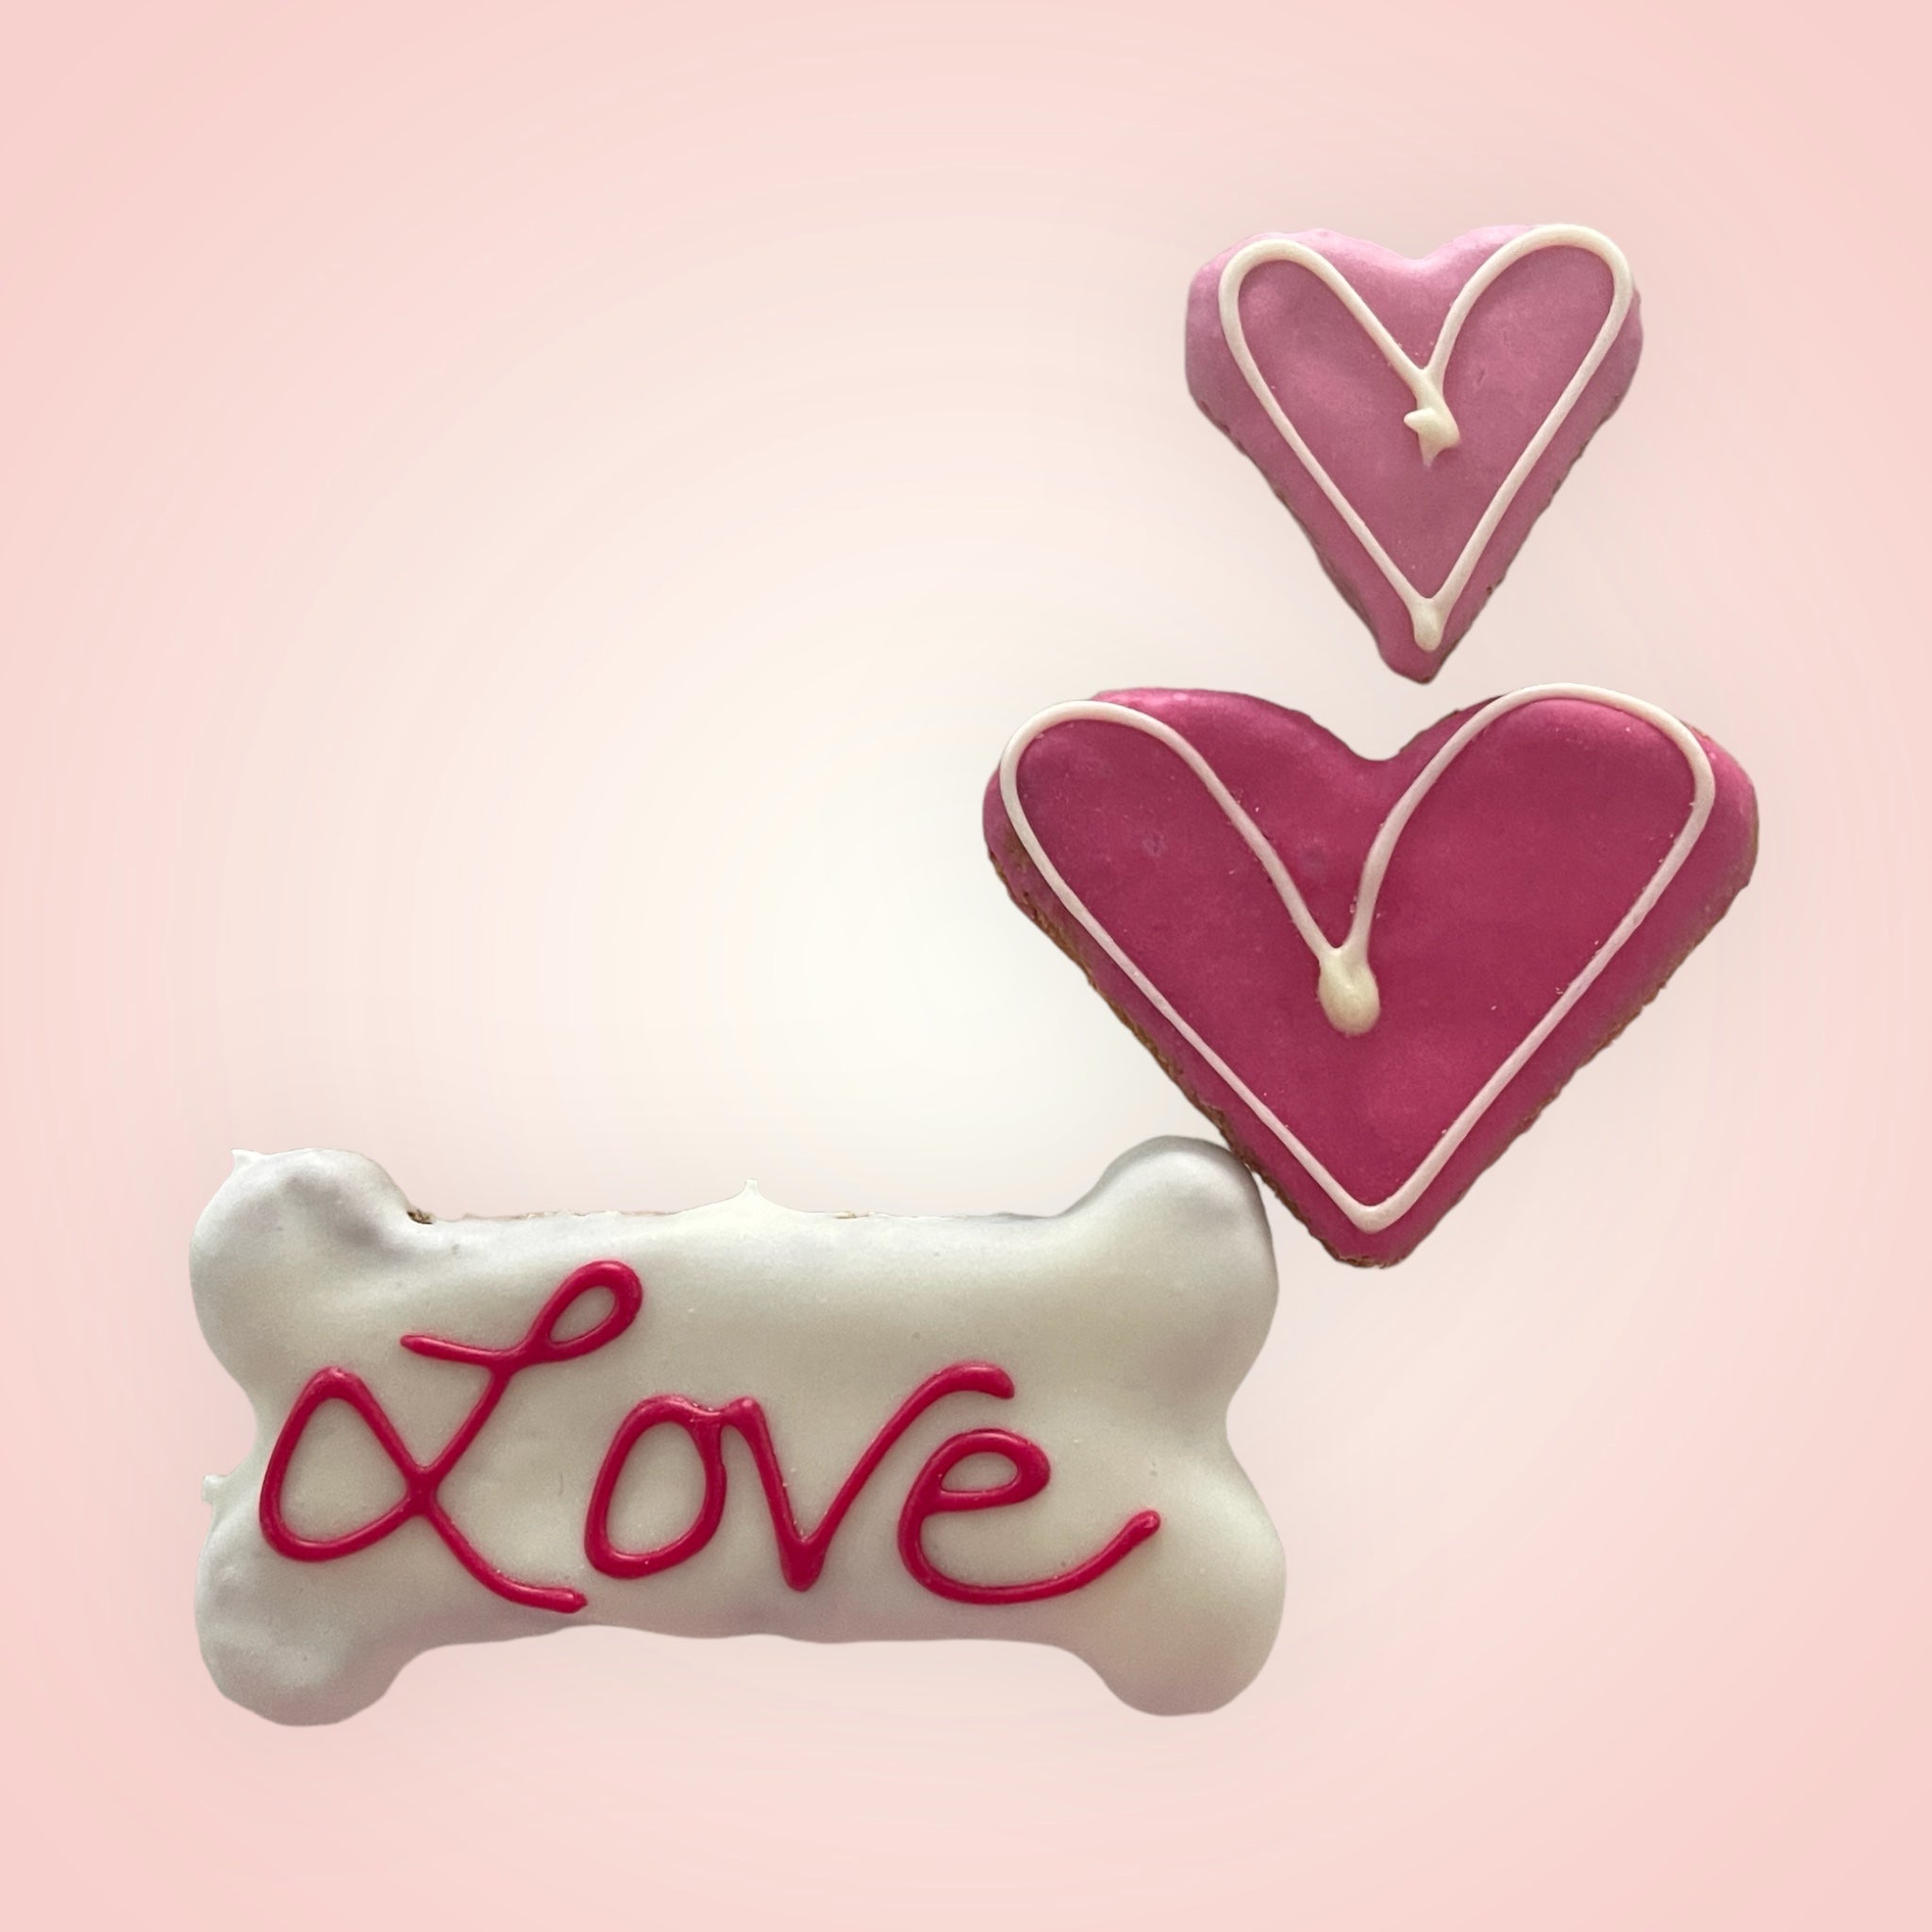 Love and Heart Dog Gift Box - Pooch Luxury